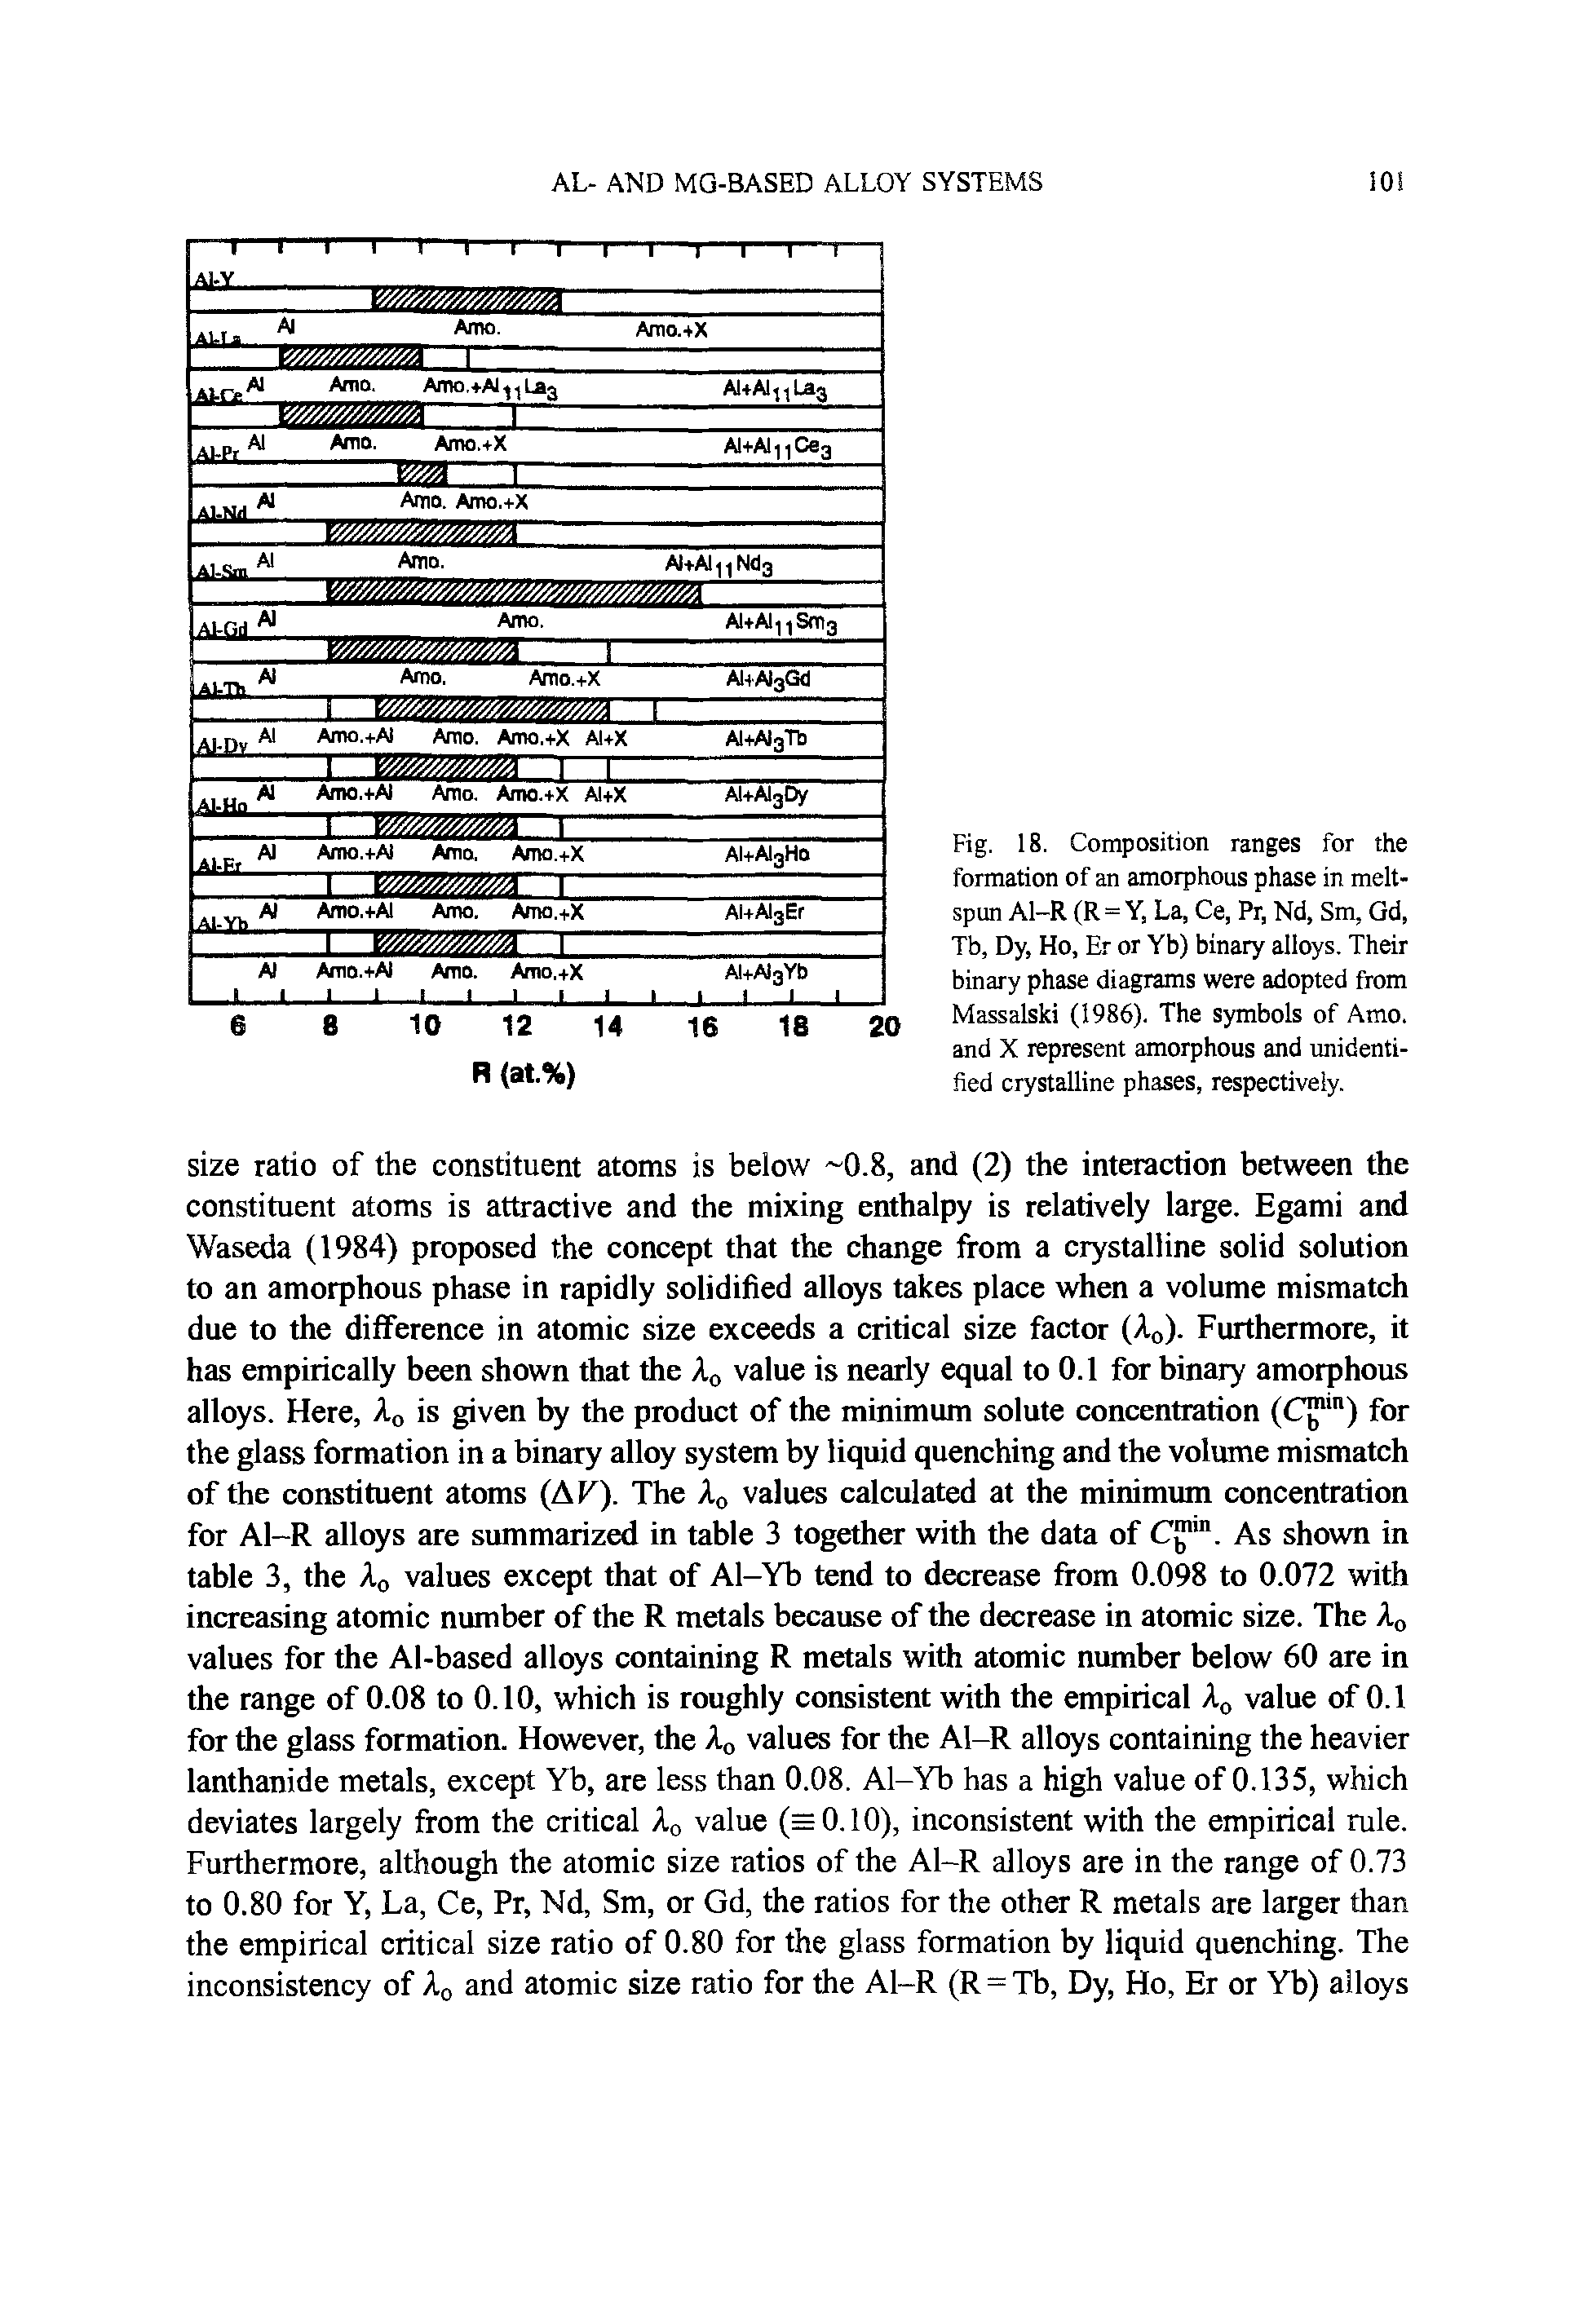 Fig. 18. Composition ranges for the formation of an amorphous phase in melt-spun Al-R (R=Y. La, Ce, Pr, Nd, Sm, Gd, Tb, Dy, Ho, Er or Yb) binary alloys. Their binary phase diagrams were adopted from Massalski (1986). The symbols of Amo. and X represent amorphous and unidentified crystalline phases, respectively.